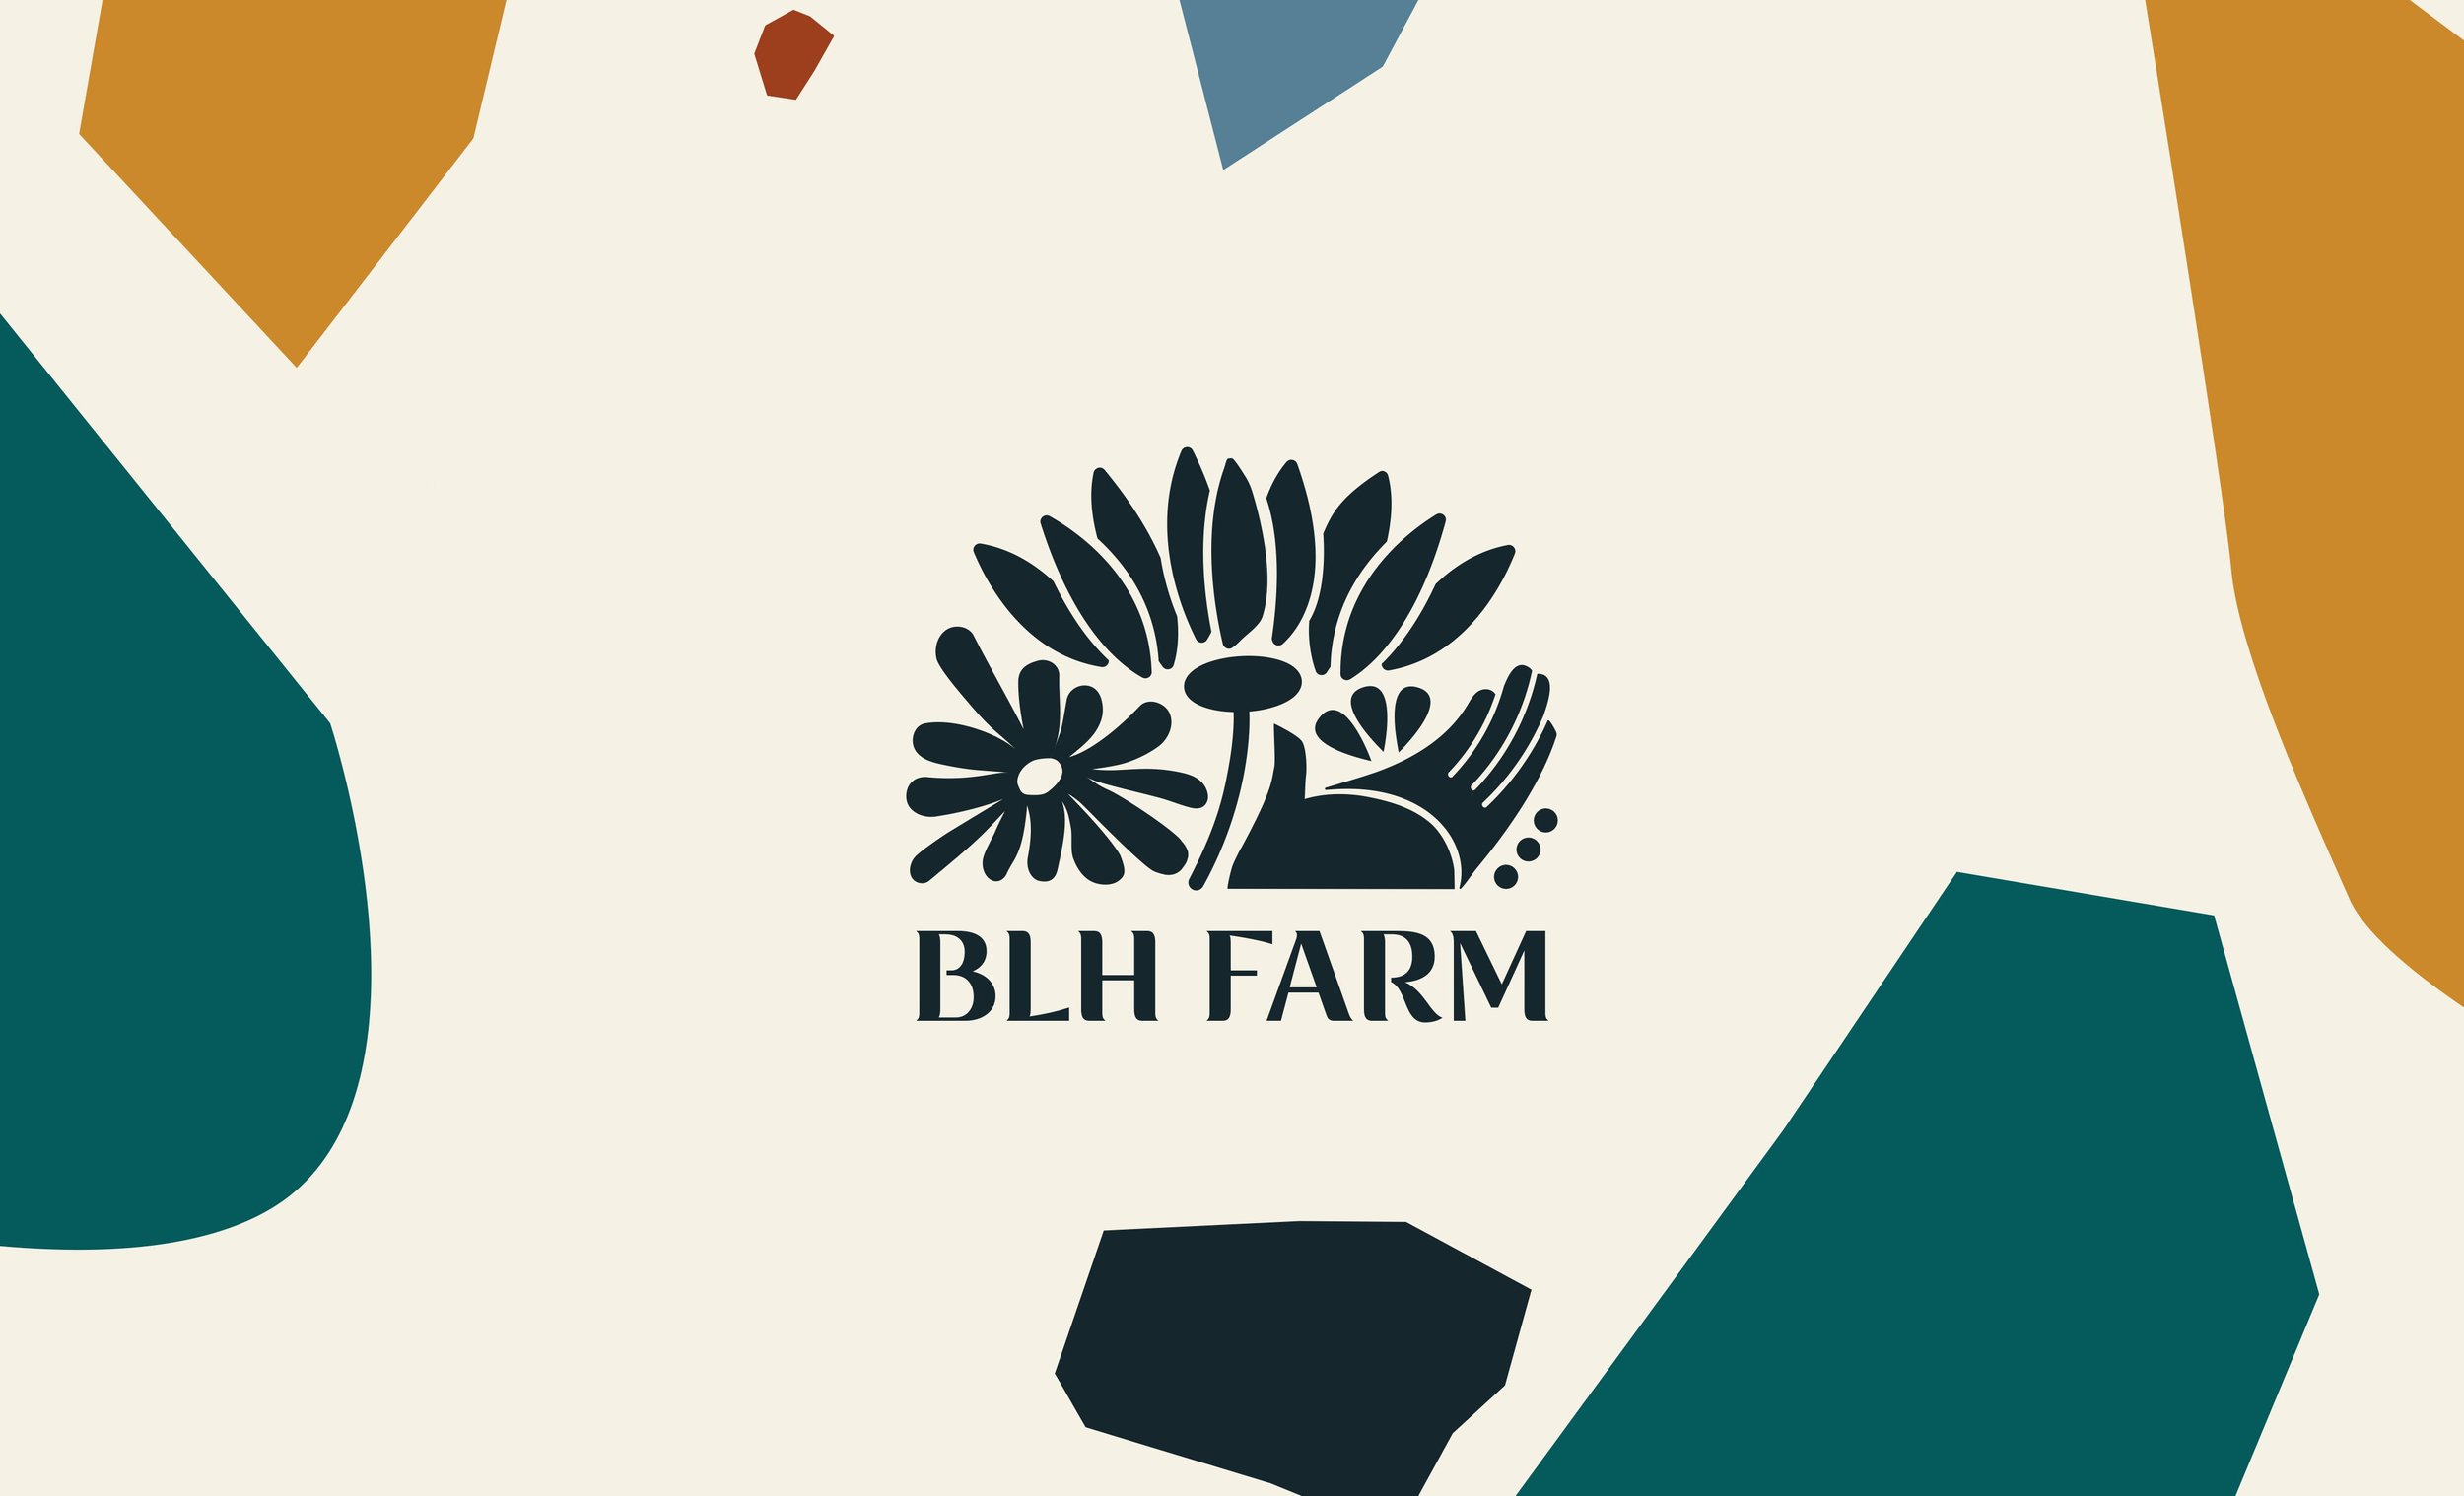  BLH farm logo with blocks of blue and orange color on border of image. 